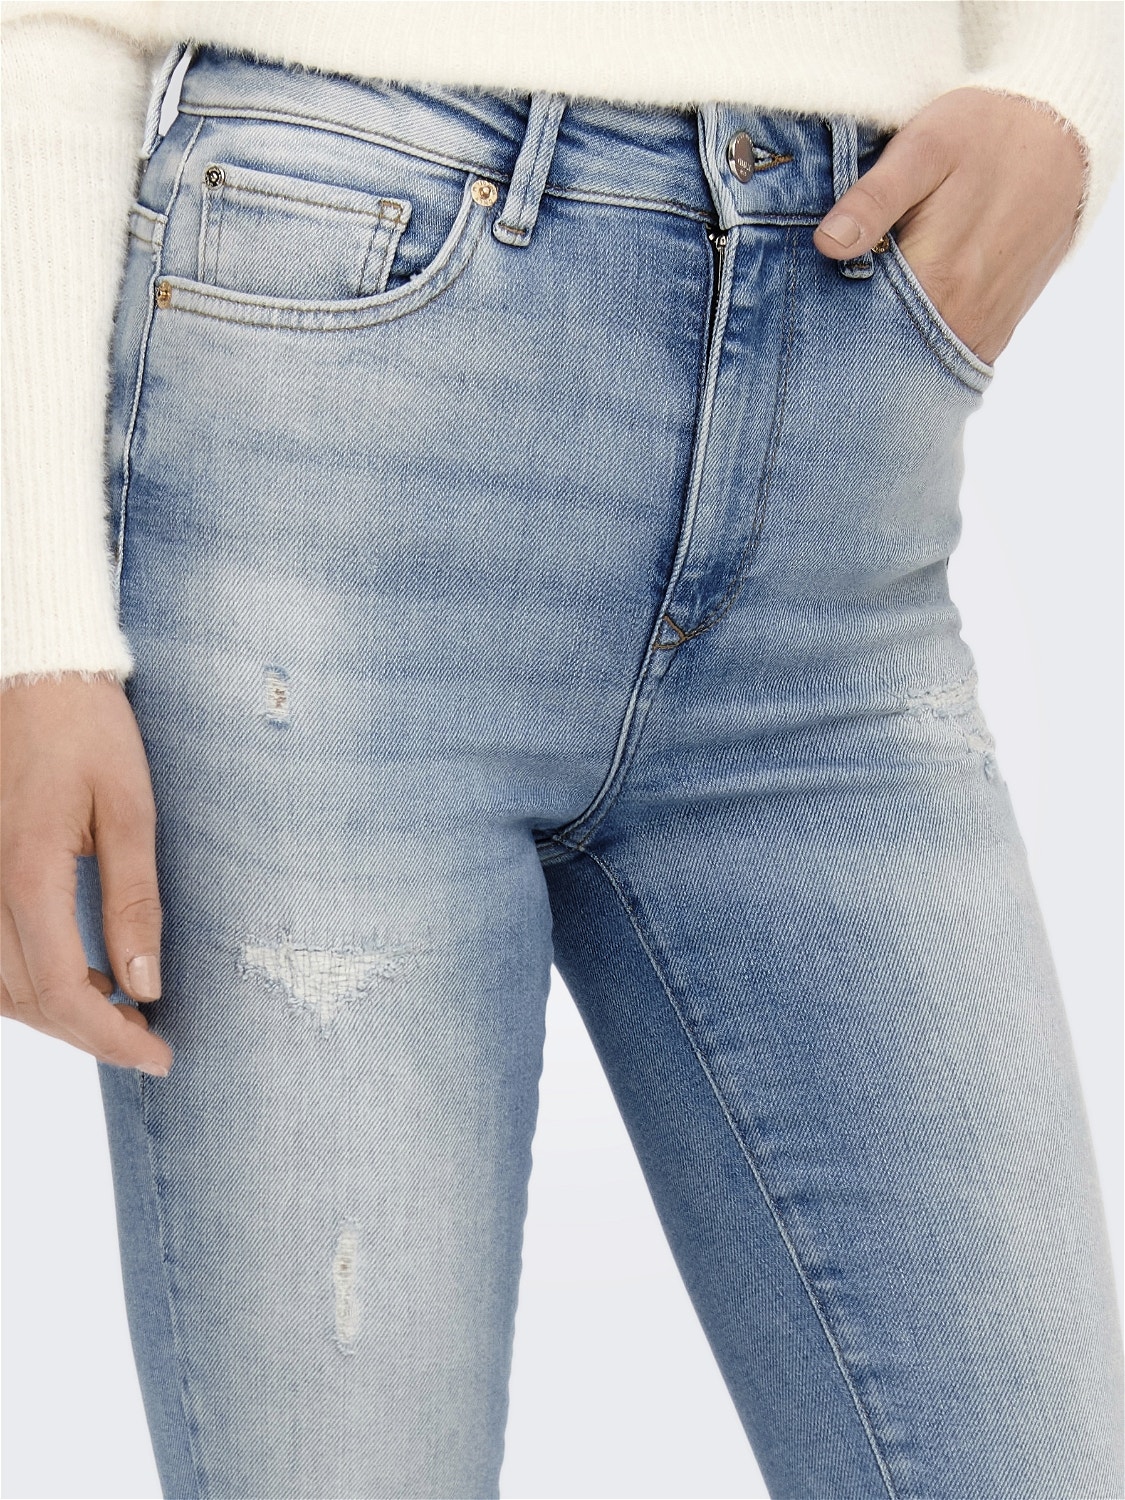 ONLY Skinny Fit Hohe Taille Jeans -Light Blue Denim - 15261949